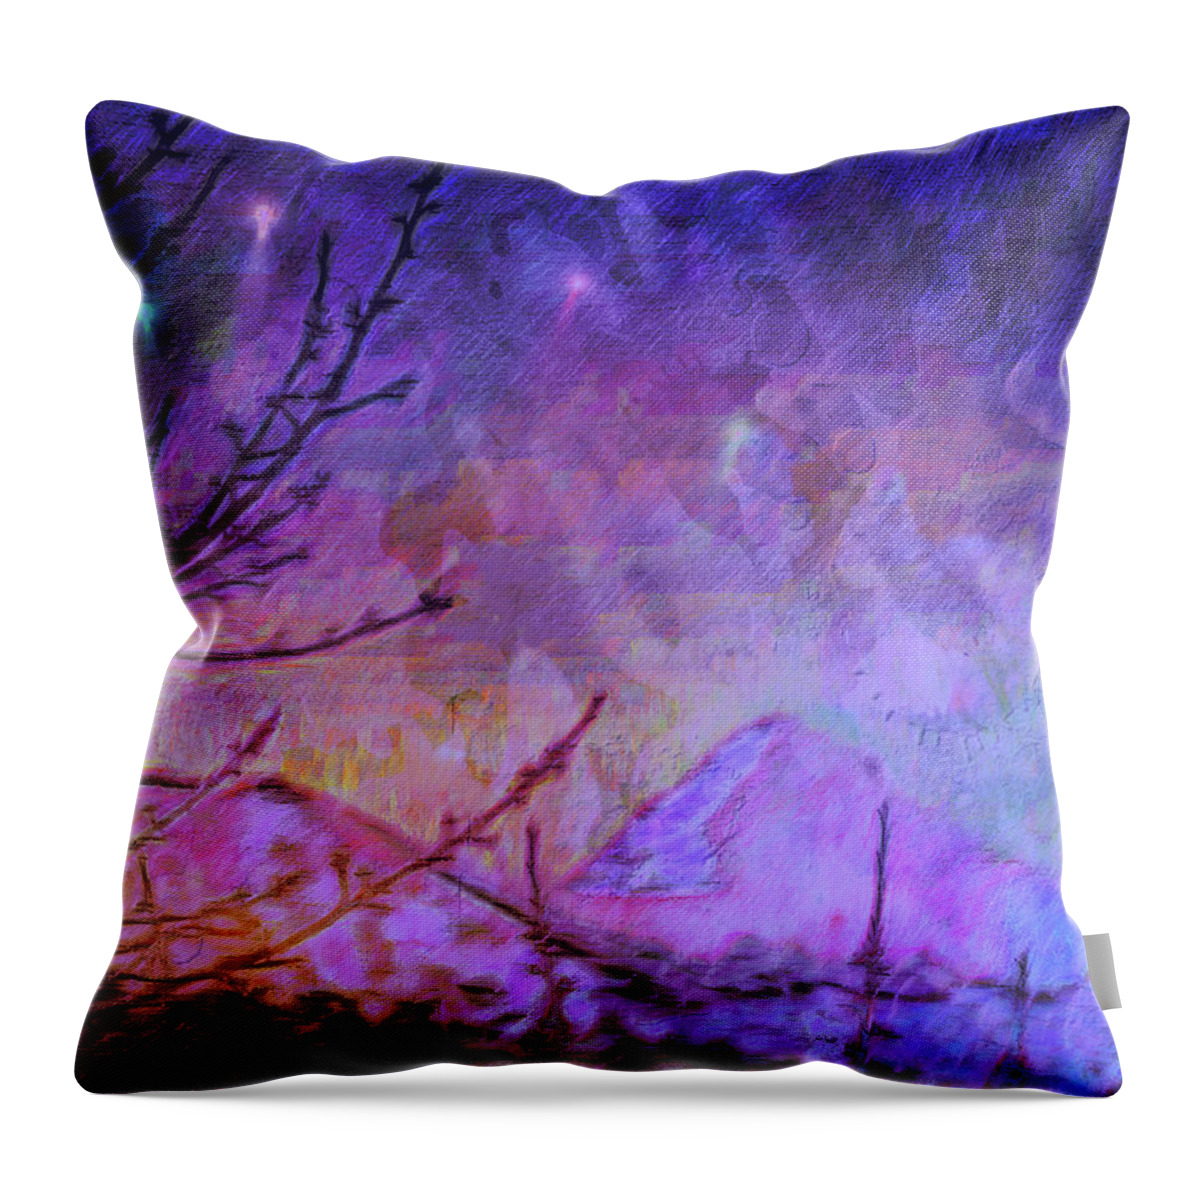 Mountains.landscape Throw Pillow featuring the painting Last Twinkling Before Dawn by Anastasia Savage Ealy